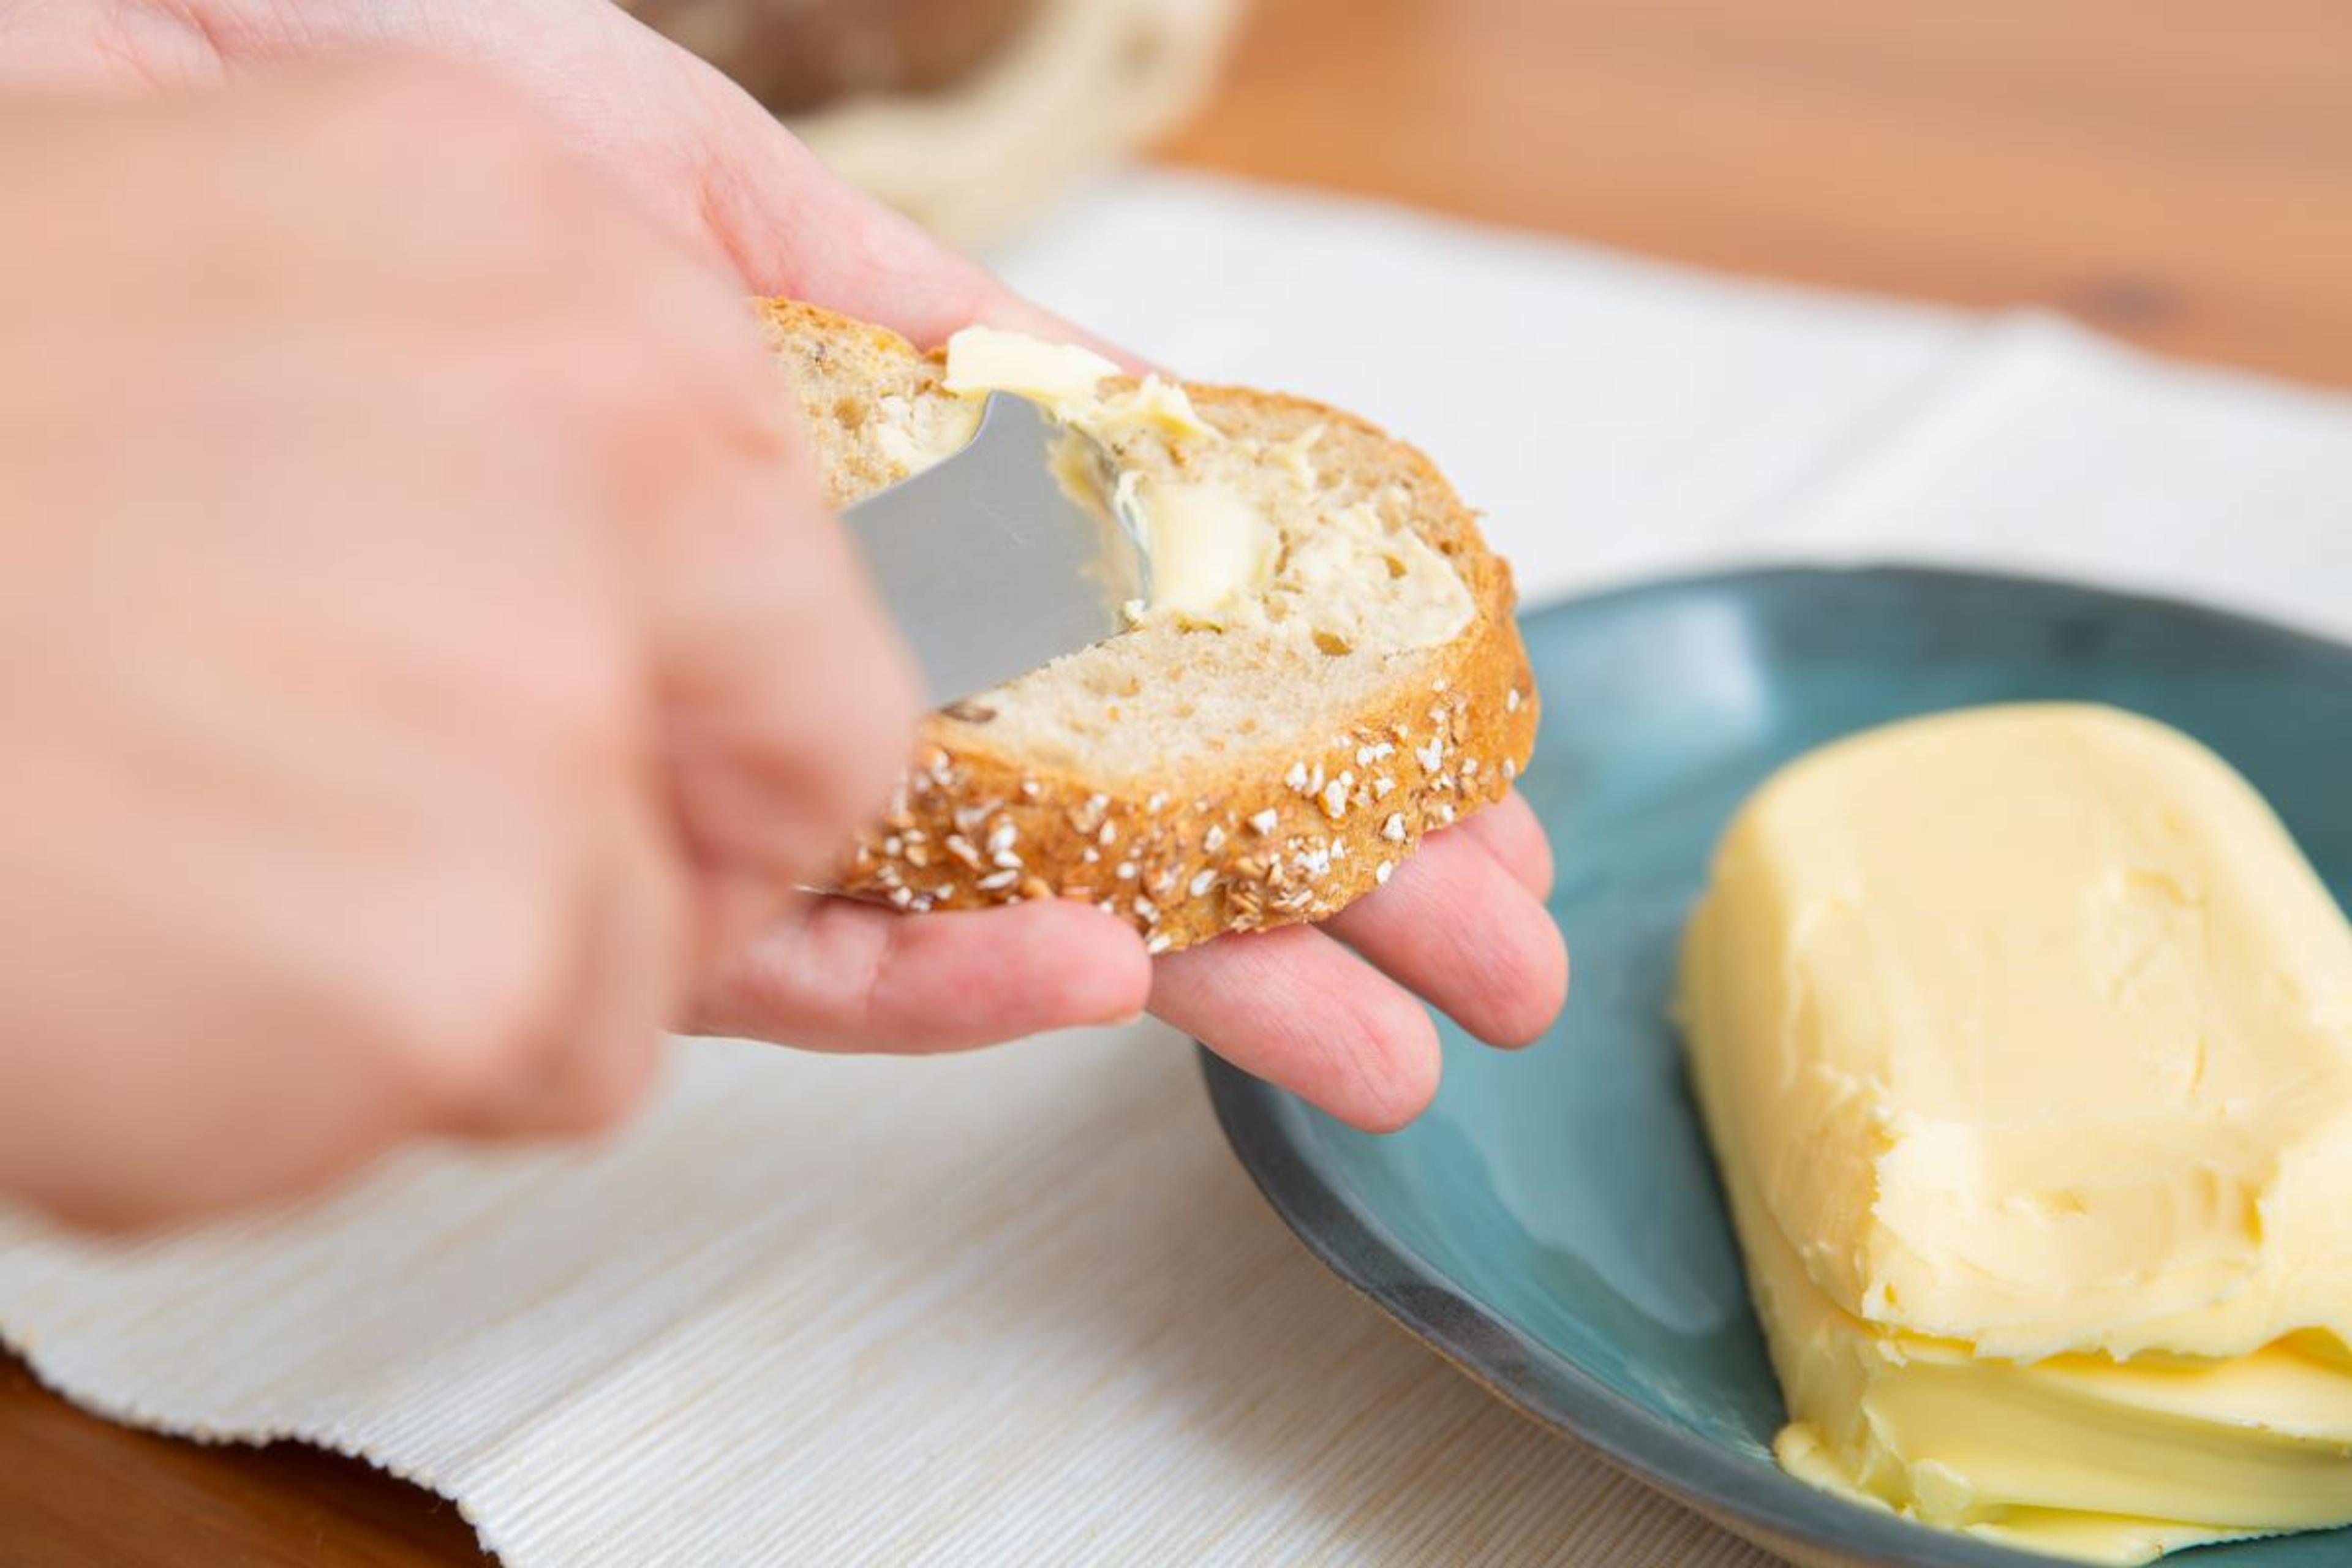 A person spreads butter on a whole grain baguette.